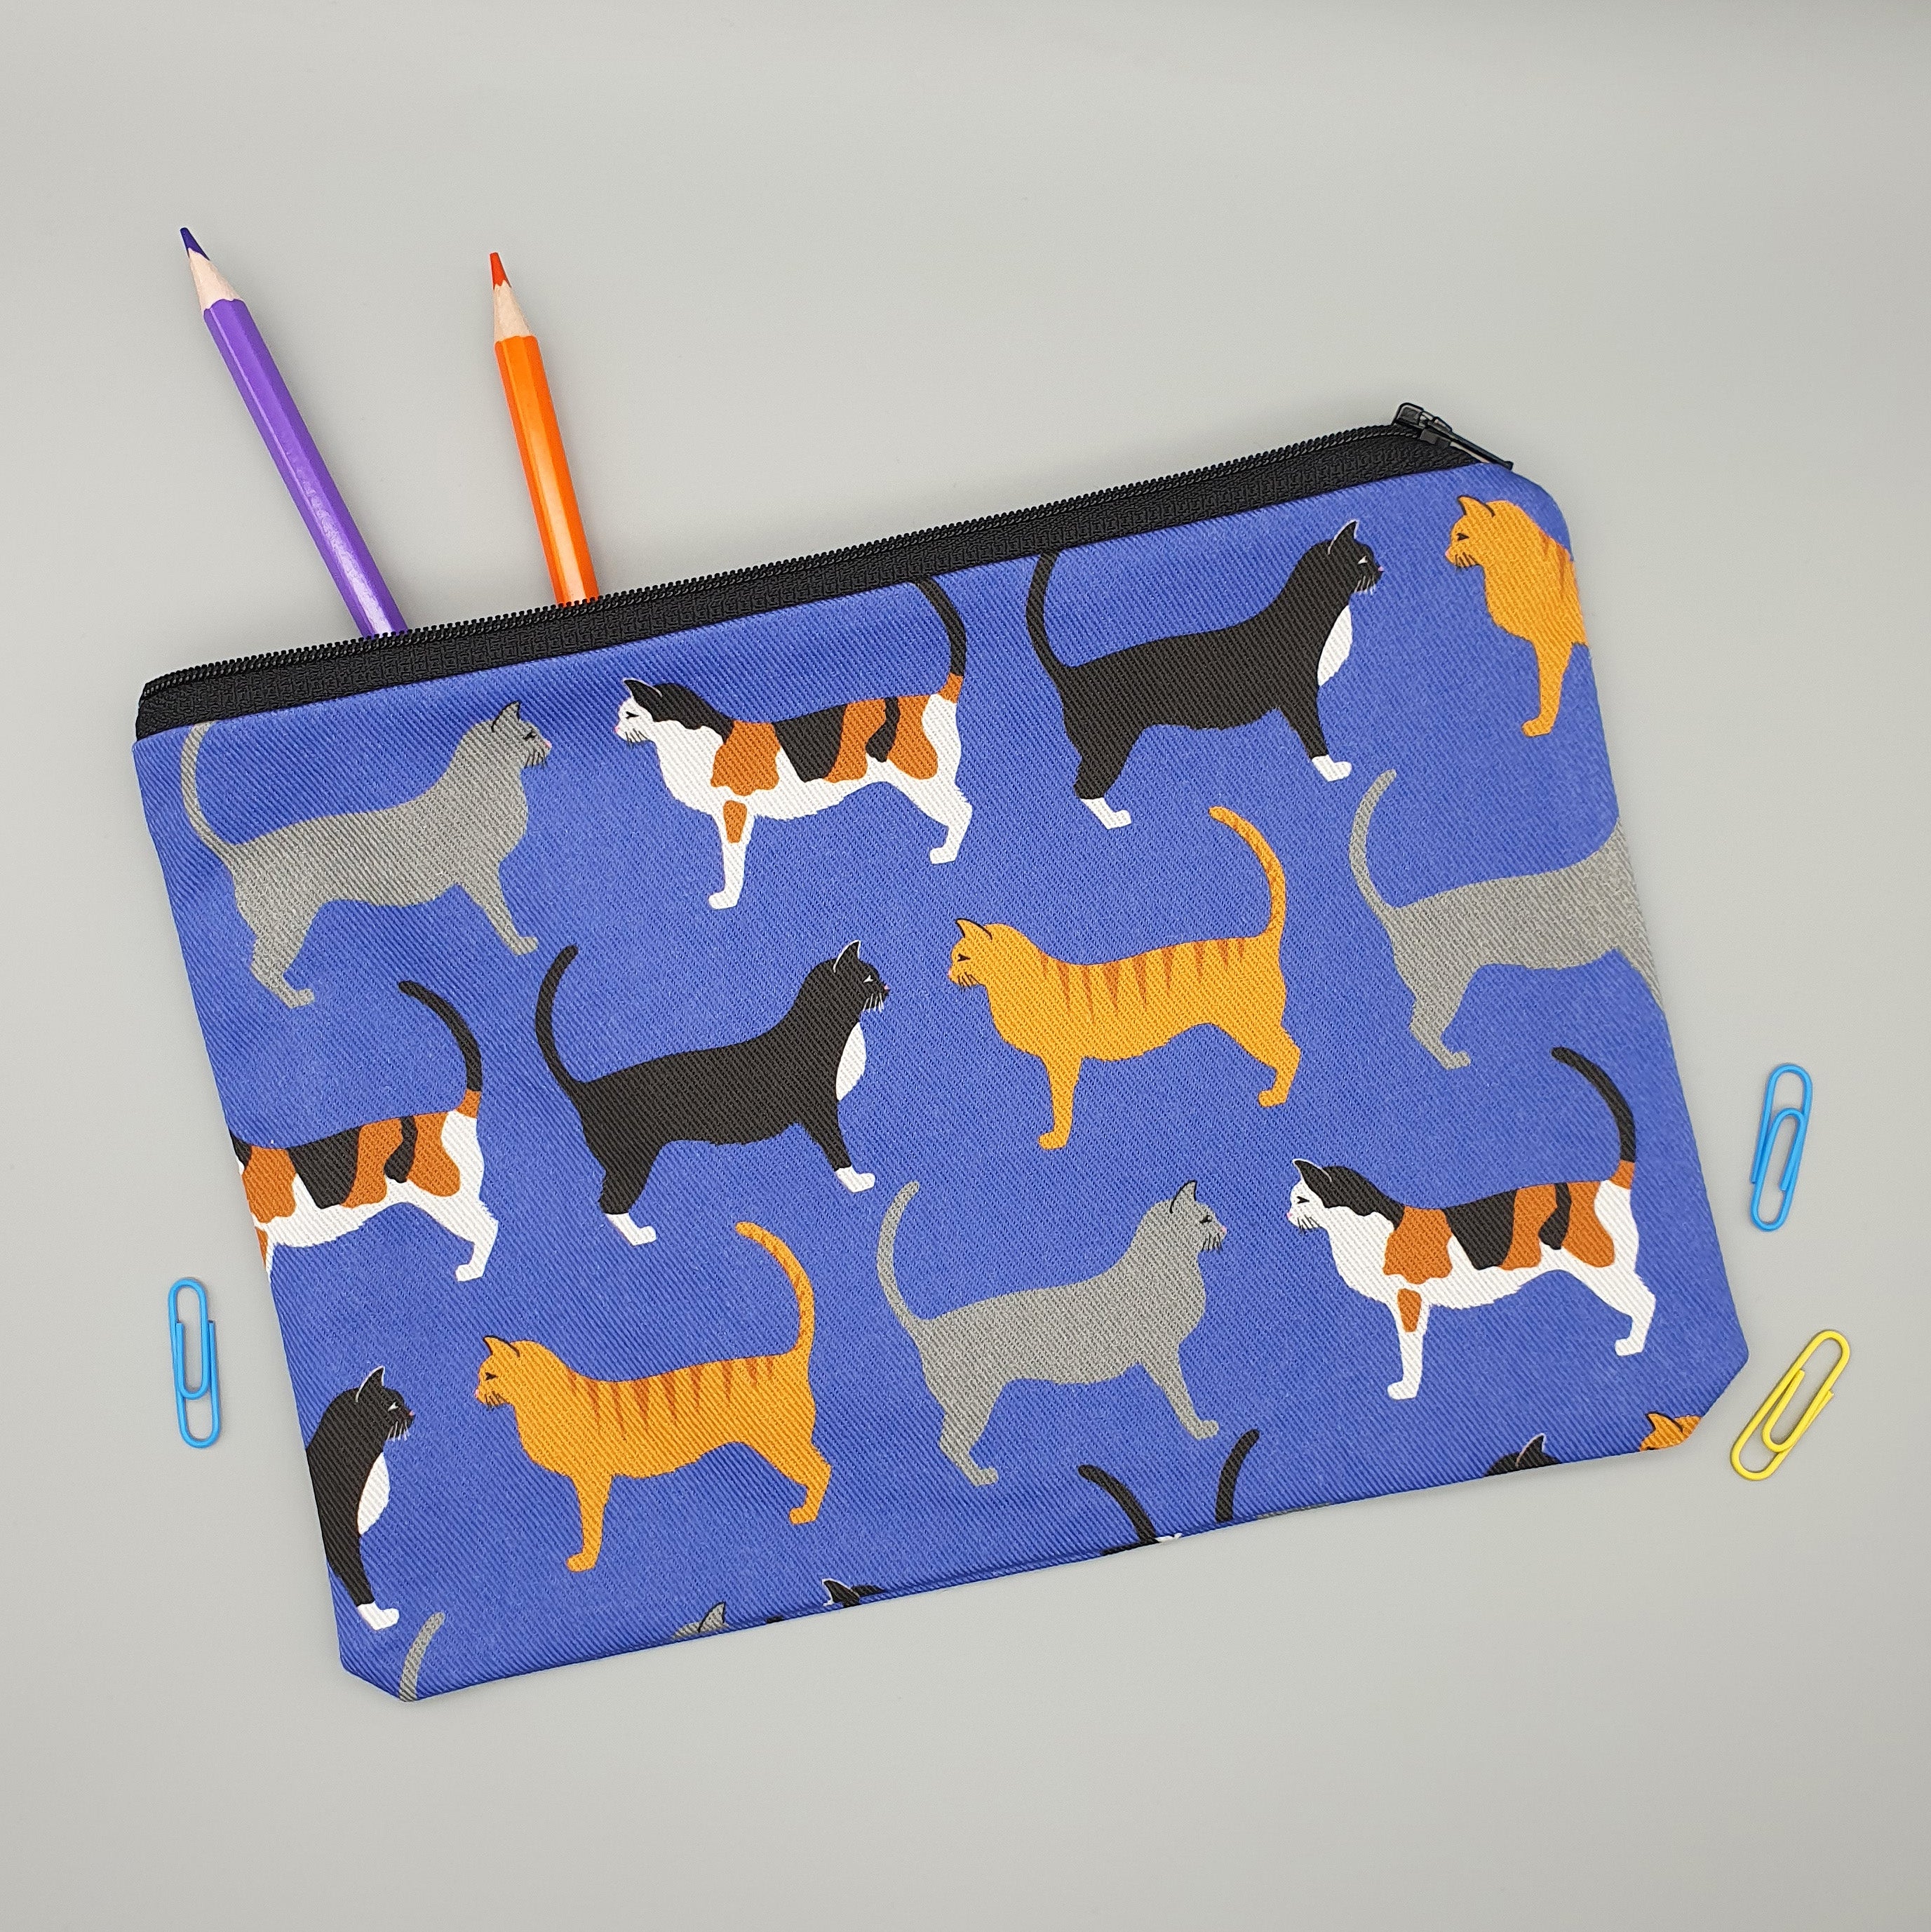 Cats handmade accessories bag storing pencils and stationery